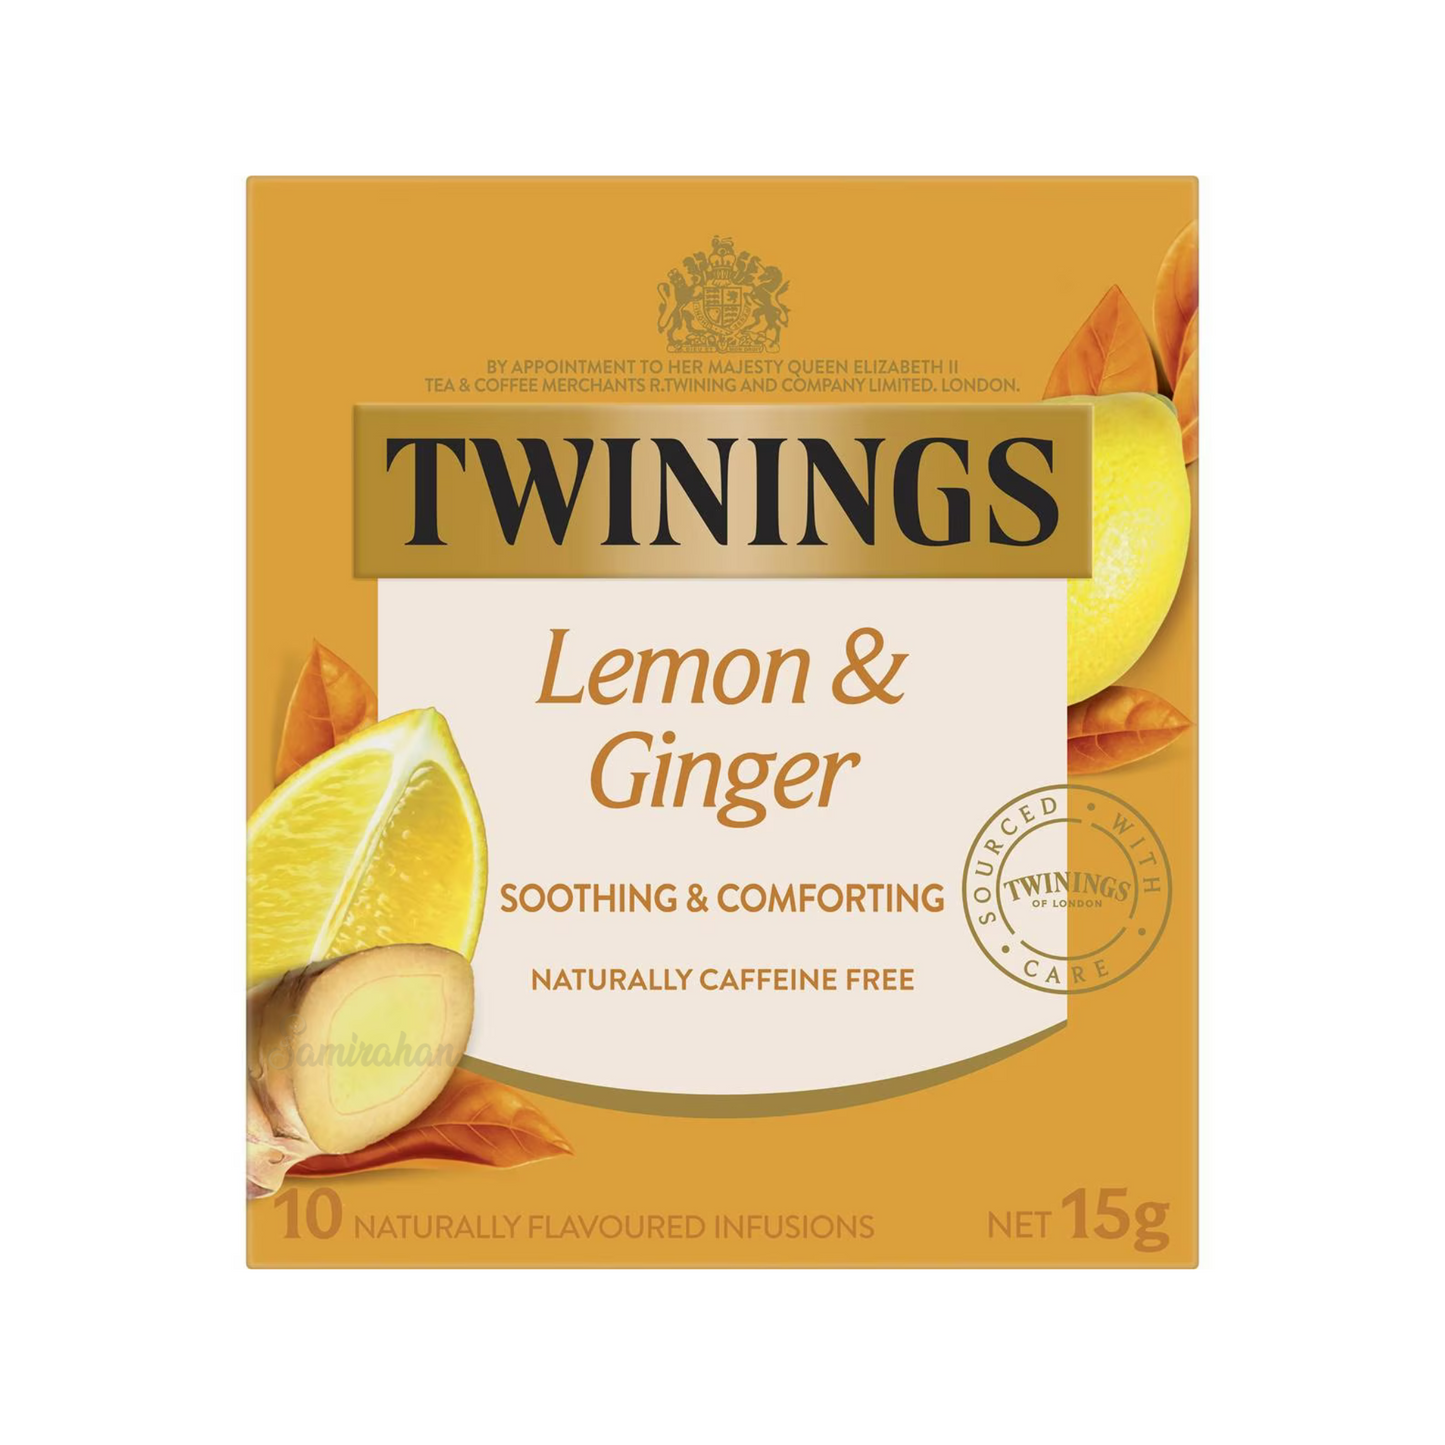 Twinings Lemon & Ginger Tea is a flavoured herbal infusion that is naturally caffeine free. Best genuine authentic foreign imported real Australian British UK instant strong delicious premium luxury quality original tasty infused English tea bag cheap price in Dhaka Chittagong Sylhet Rajshahi Bangladesh.